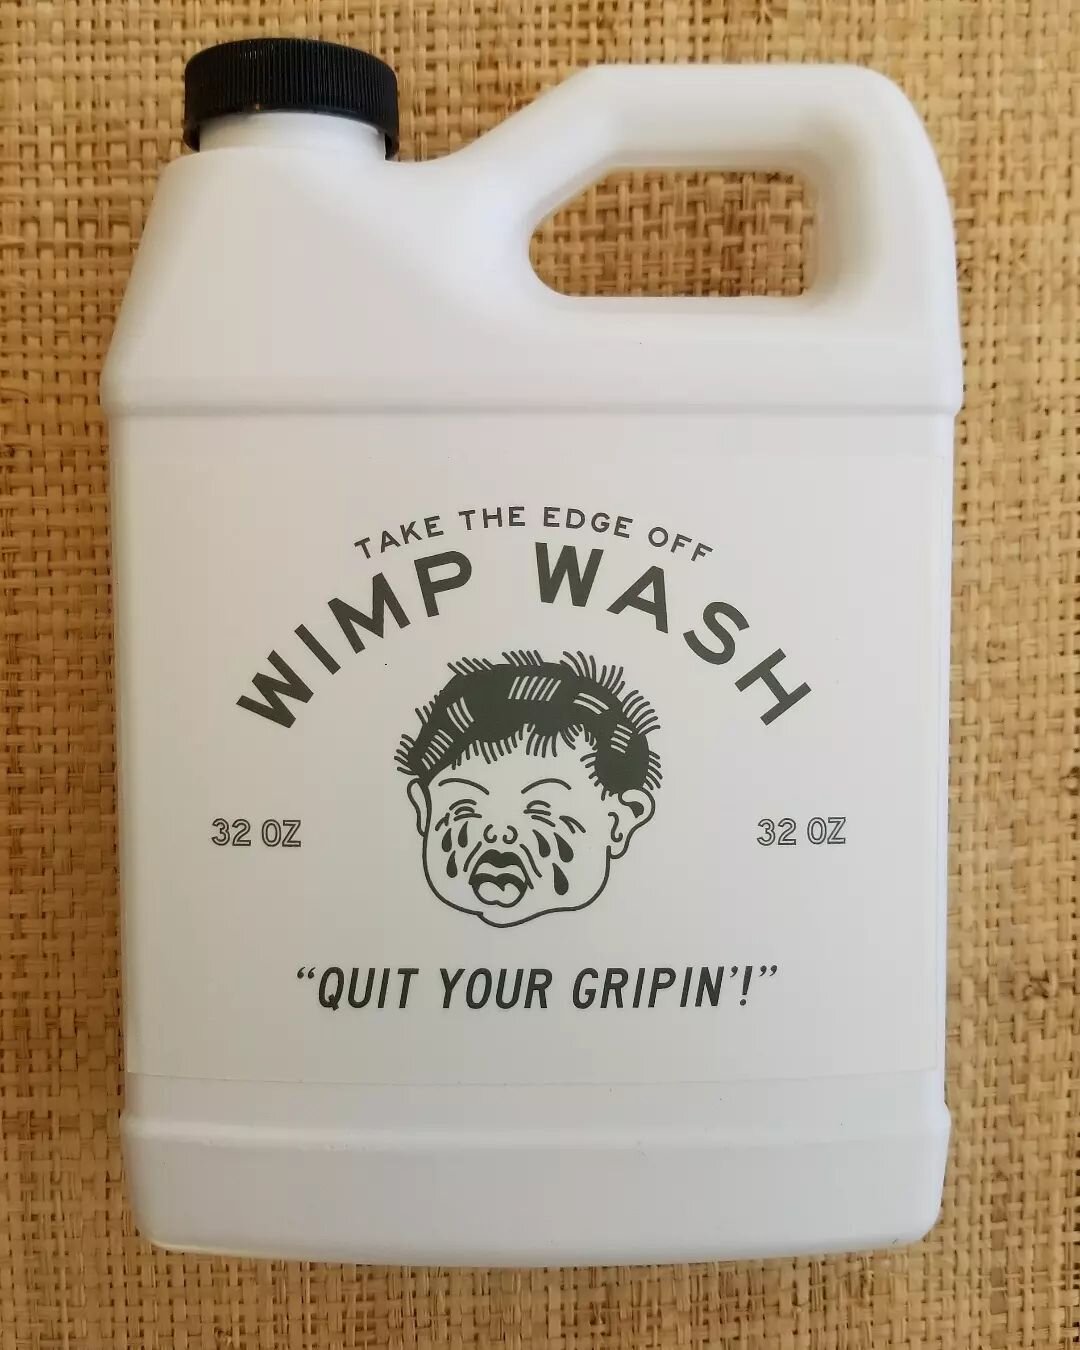 WIMP WASH!!

4% lidocaine-laced soap

Tattoos hurt. Yep. But don't let a little pain get in your way! When your client's a-gripin', just hit em' with some Wimp Wash. 

They'll appreciate it and so will you.

Wimp Wash won't completely numb your clien